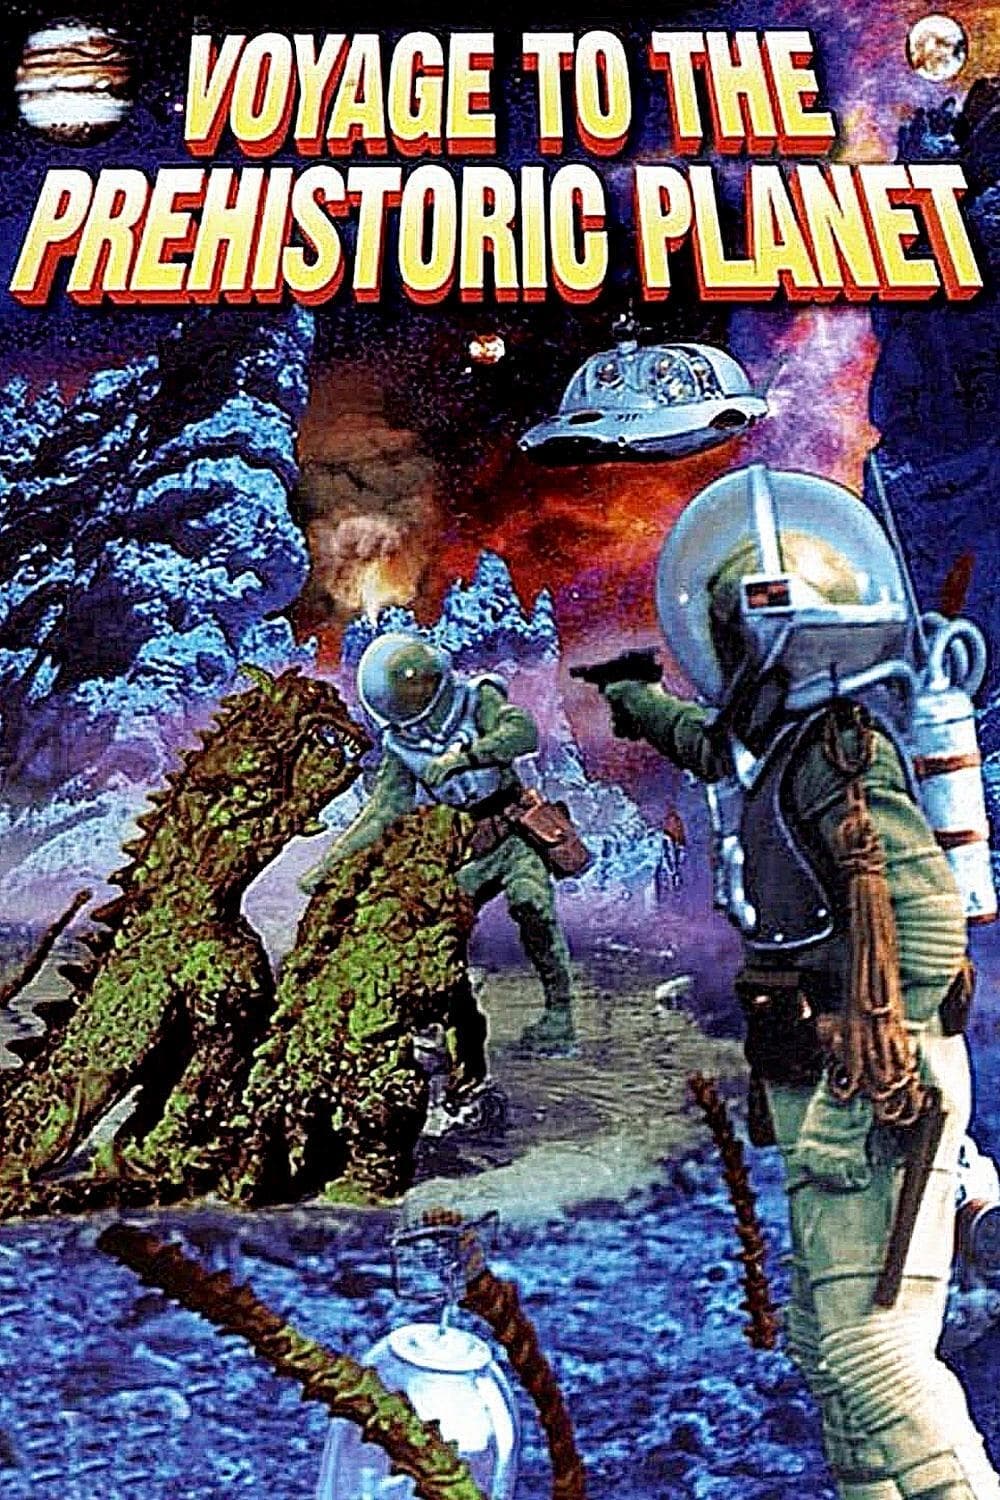 Voyage to the Prehistoric Planet (1965)